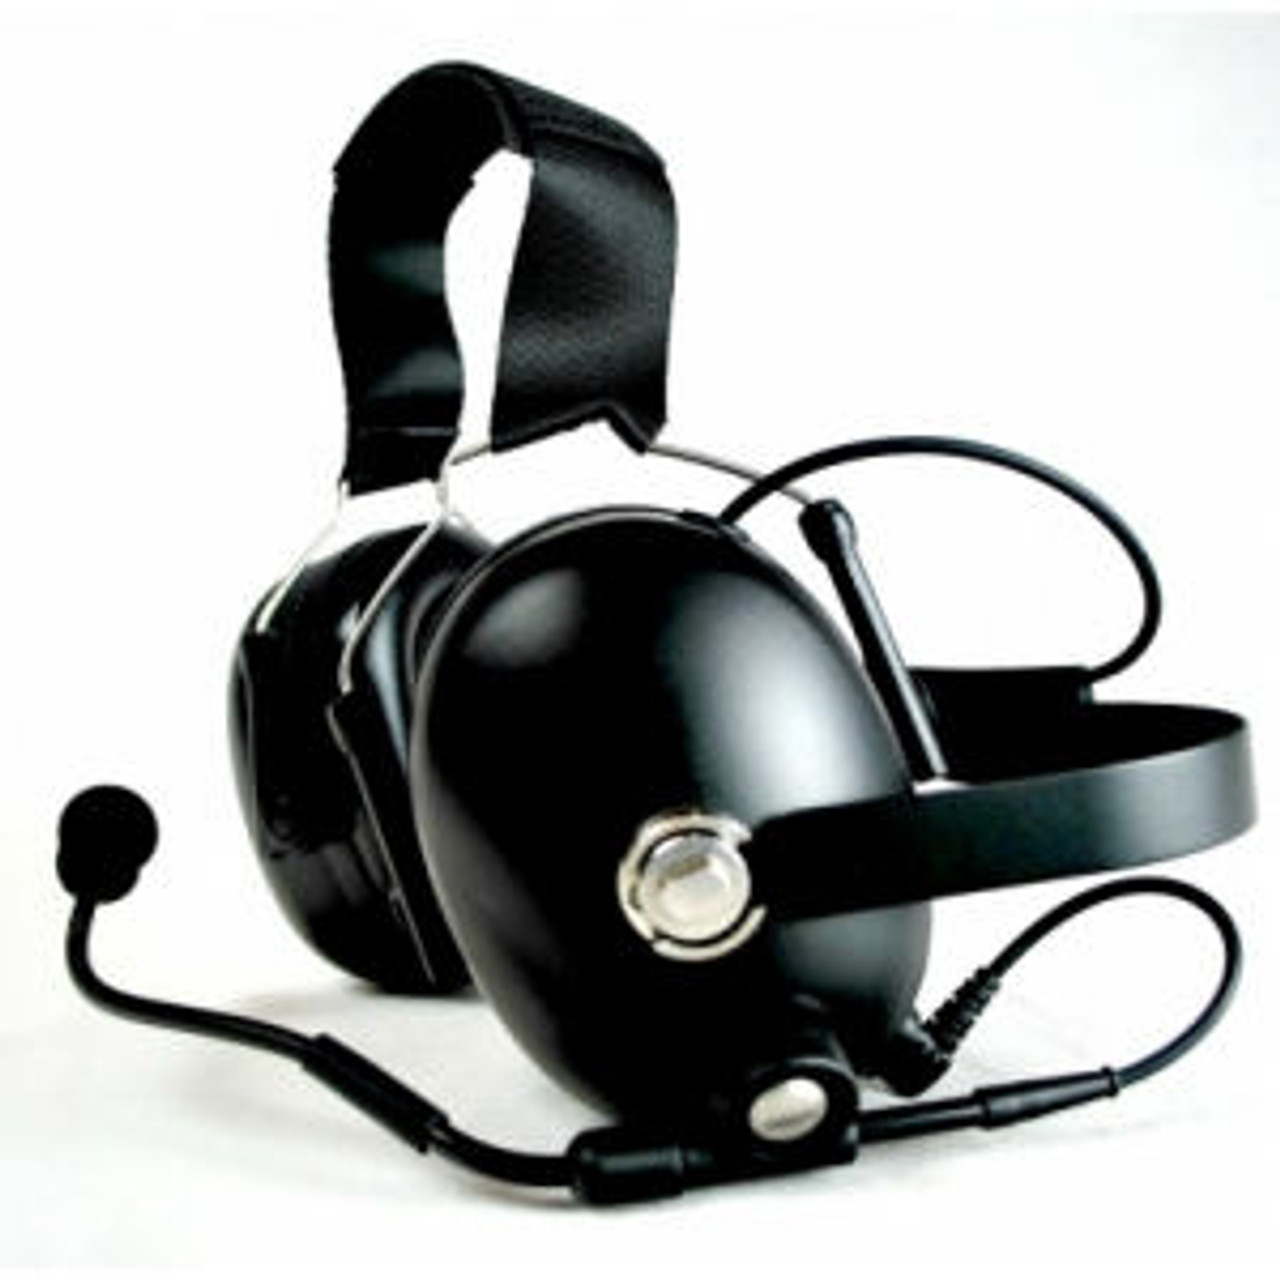 M/A-Com SPD2000 Noise Canceling Double Muff Behind The Head Headset